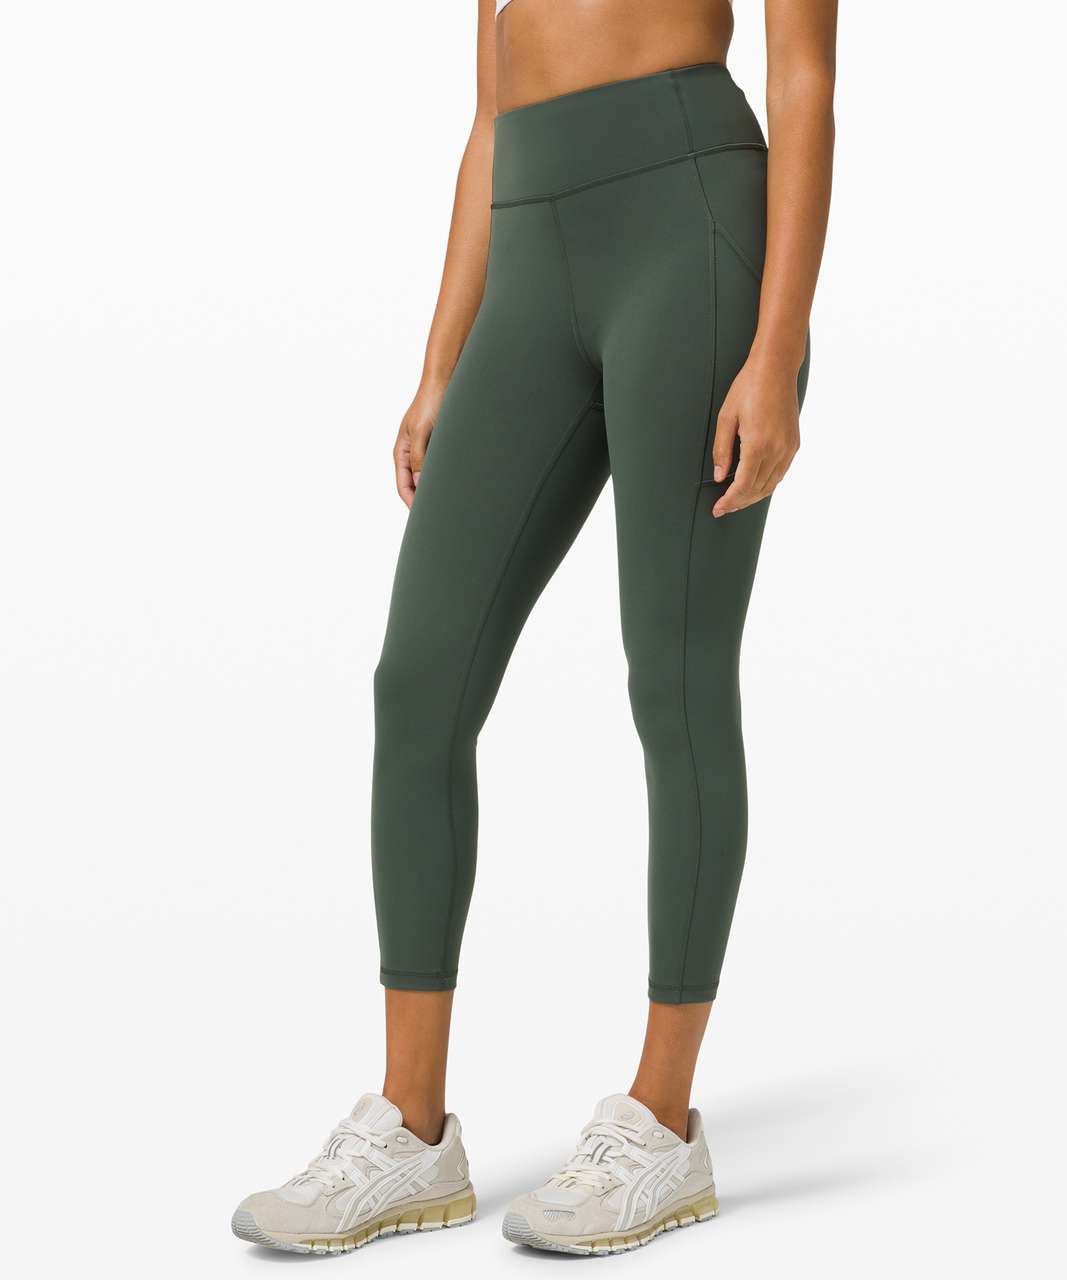 Already too into smoked spruce for my own good ☹️ : r/lululemon